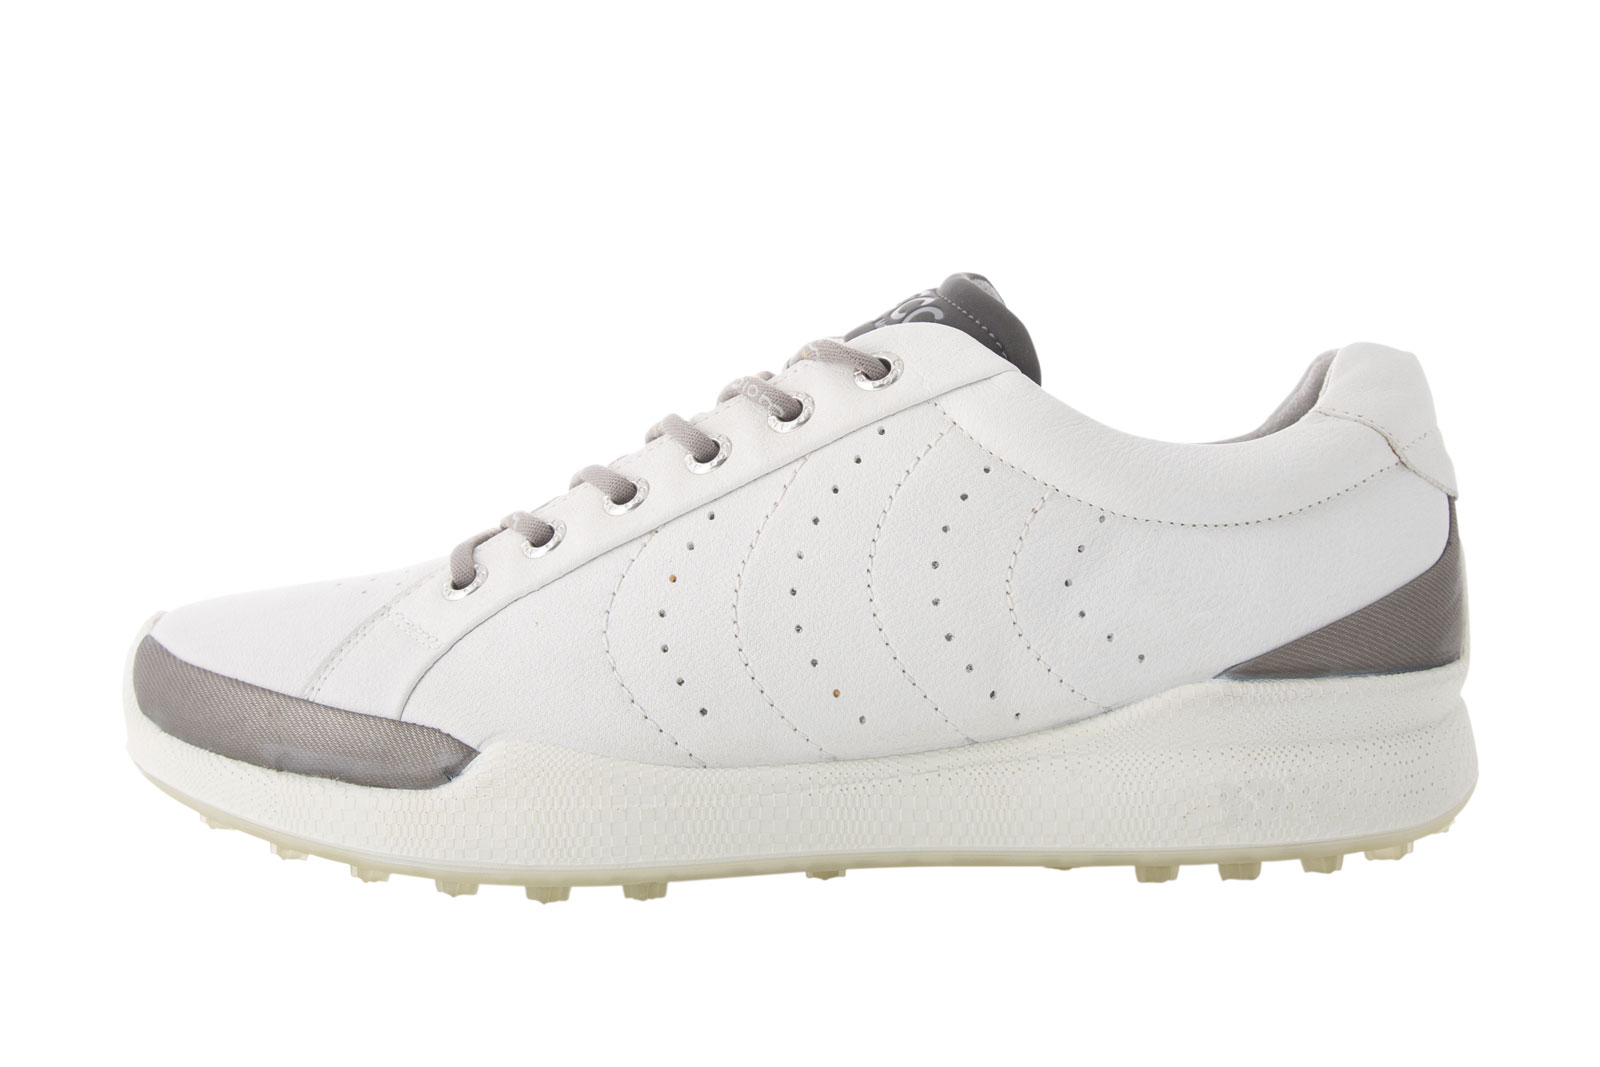 25 Years of ECCO Golf, 2012: ECCO GOLF BIOM HYBRID the first golf shoe with BIOM NATURAL MOTION technology